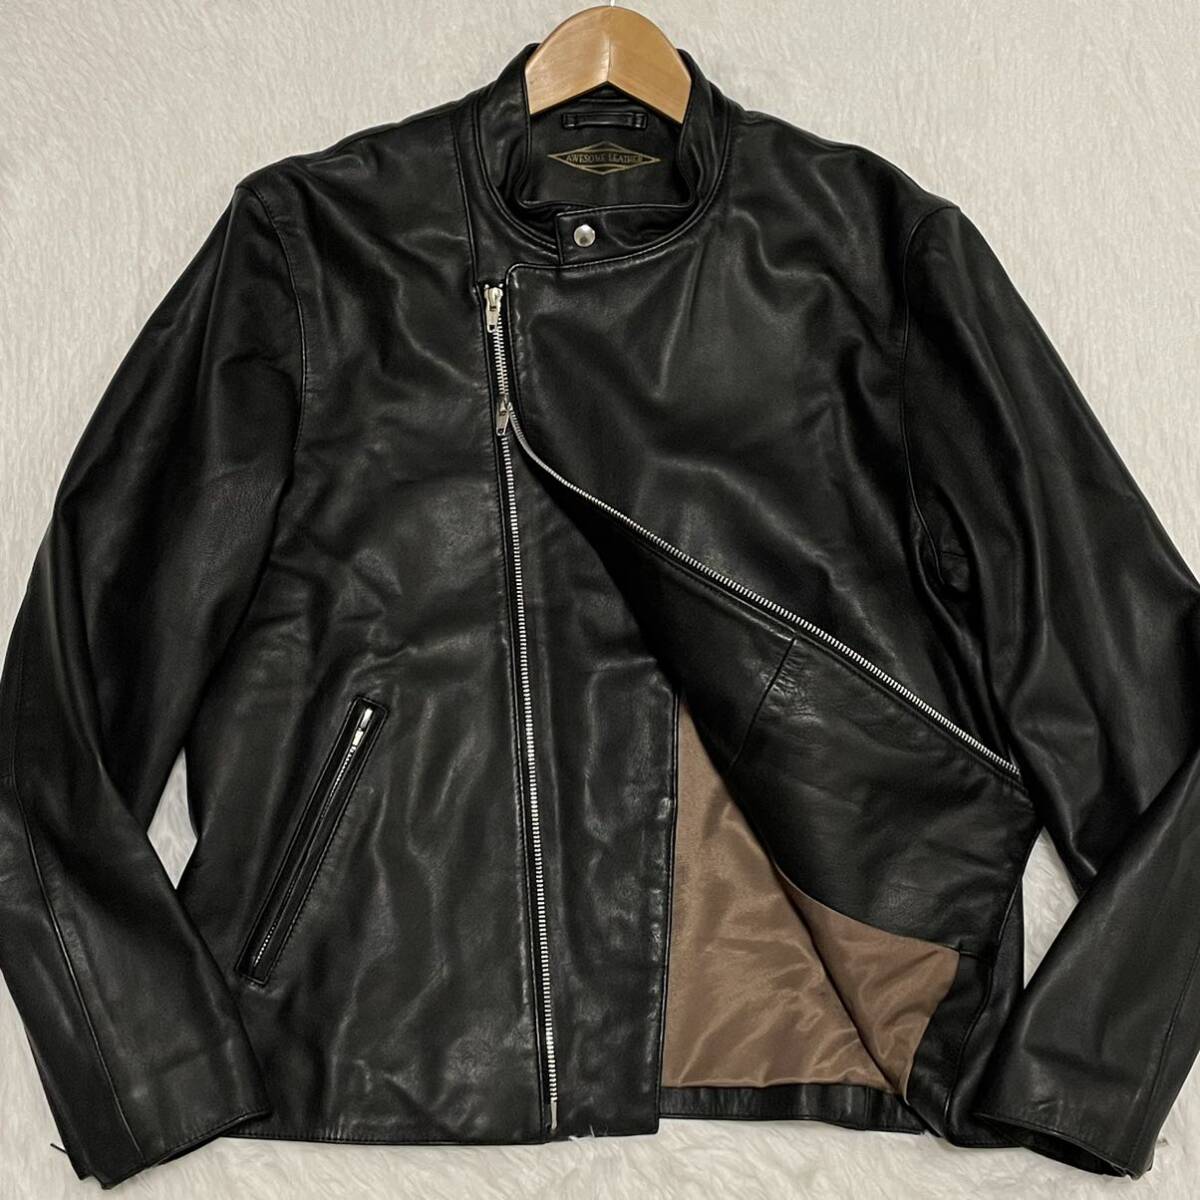  unused class /L size *o- Sam leather [ Toro Toro feeling of quality ]awesomeleather leather jacket Rider's go-to leather .. leather double Zip 3892